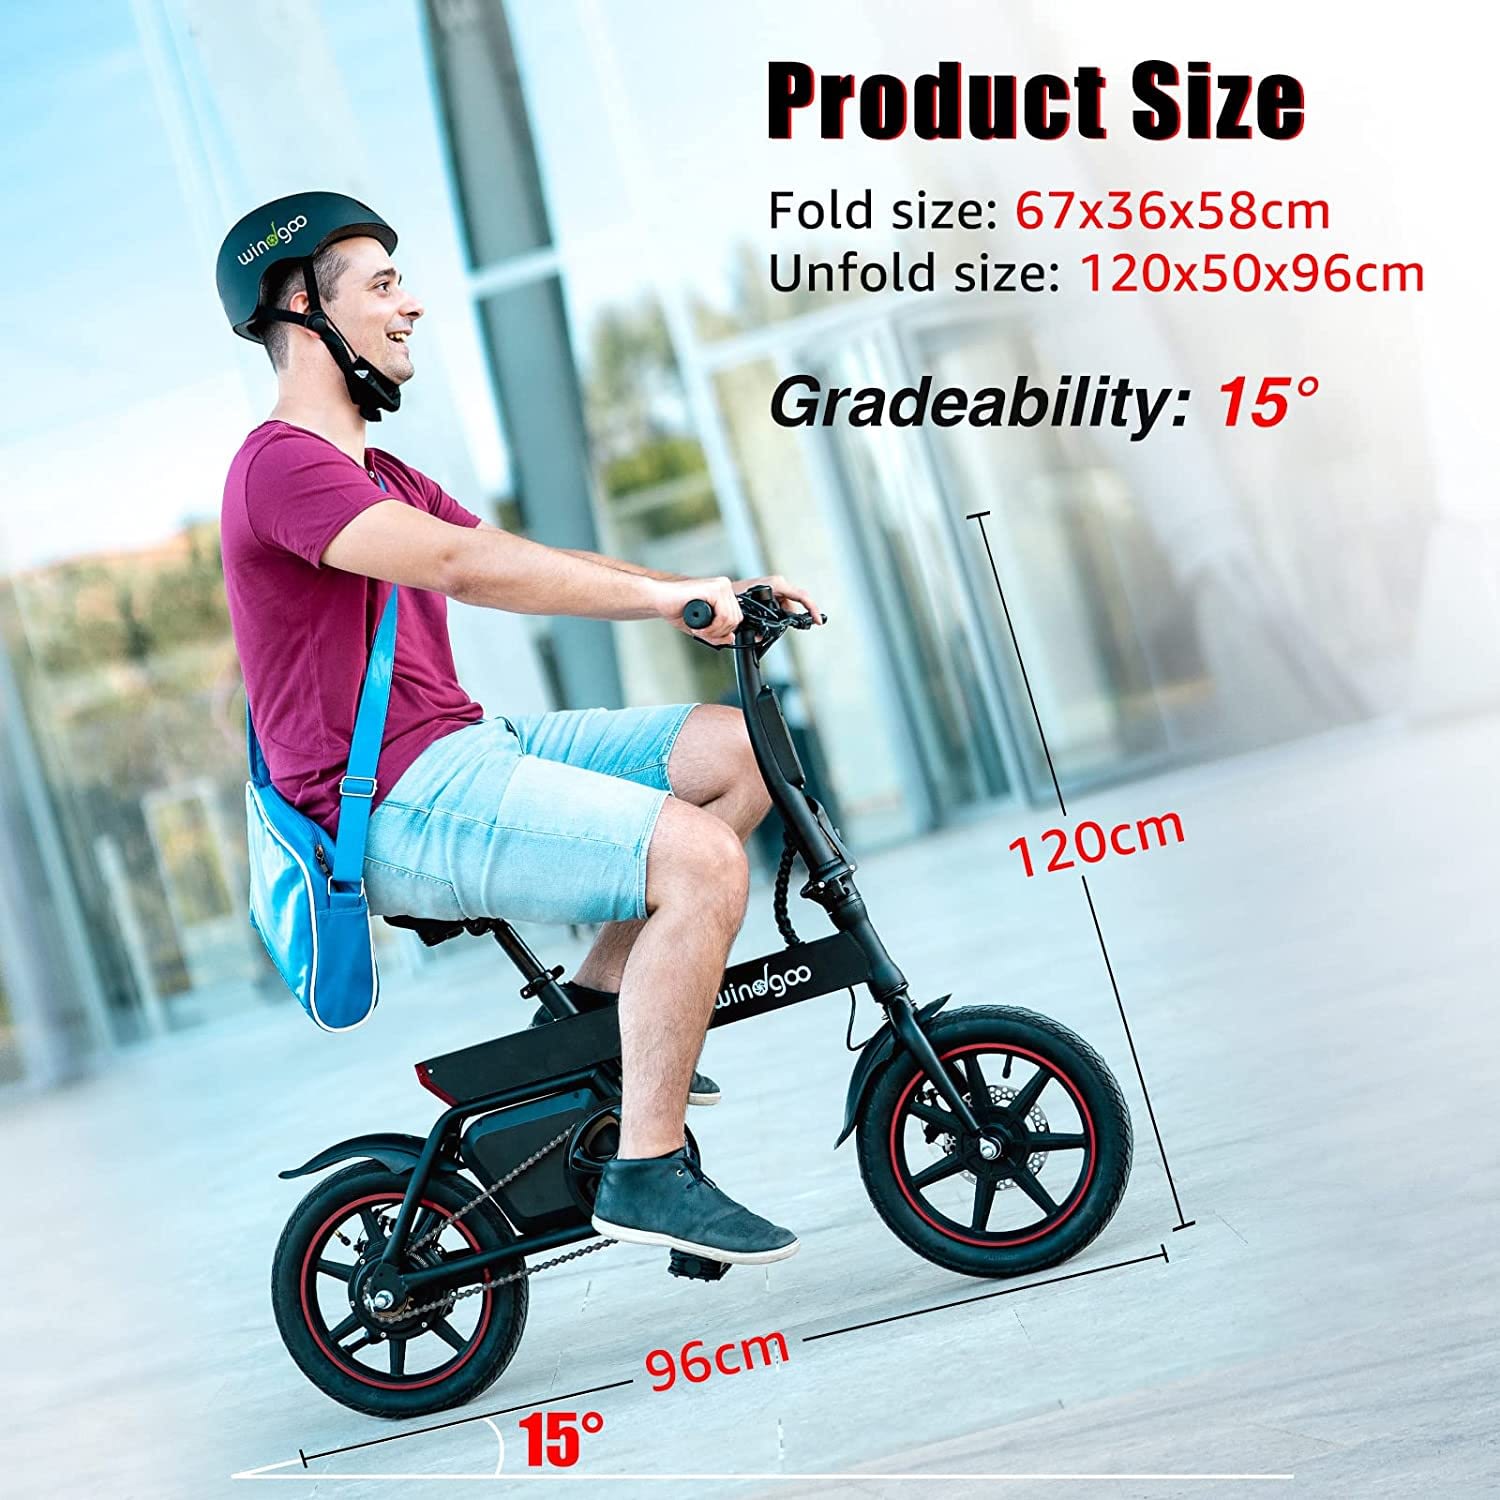 Max Speed 25km/h 14“ Super Lightweight TOEU Electric Bike 350W/36V Removable Charging Lithium Battery Unisex Bicycle Urban Commuter Folding E-bike